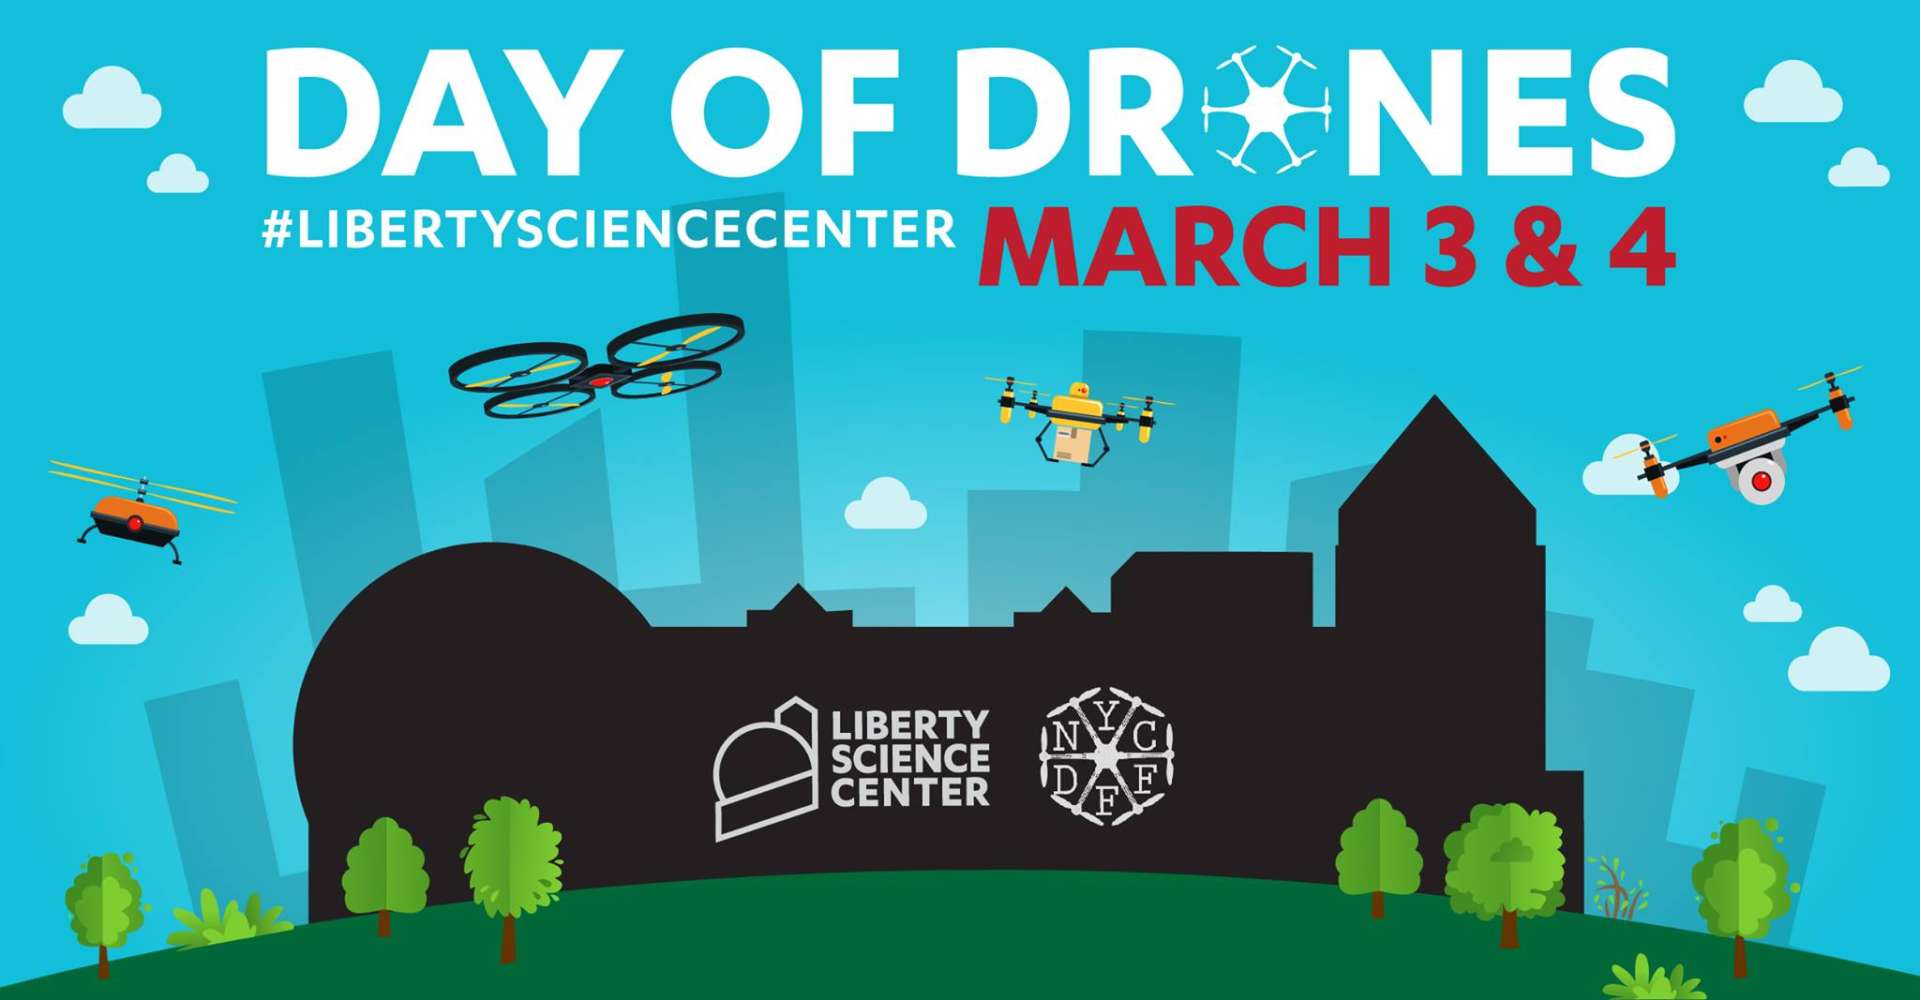 drone-liberty-science-center